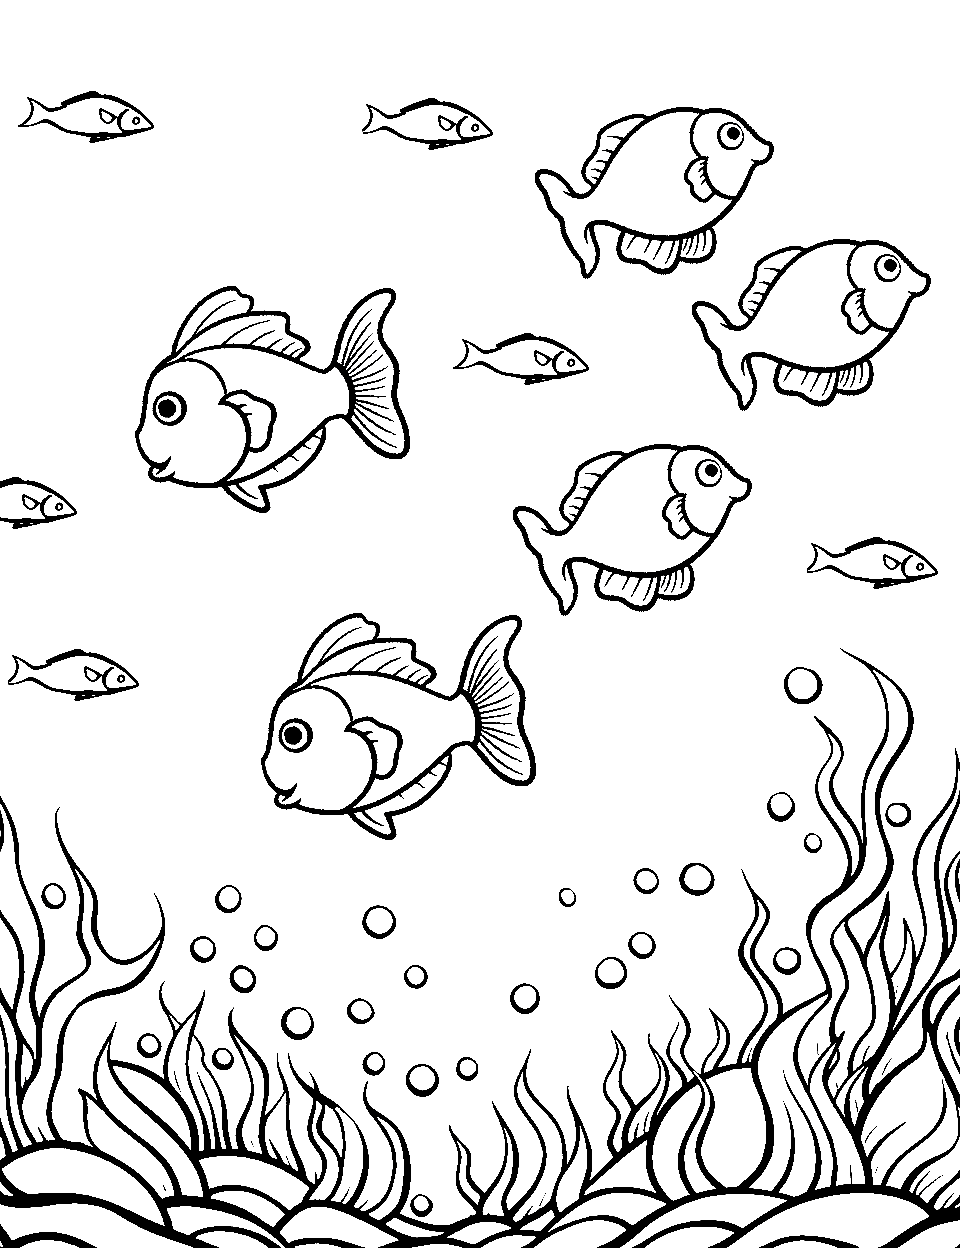 Ocean coloring pages free printable sheets